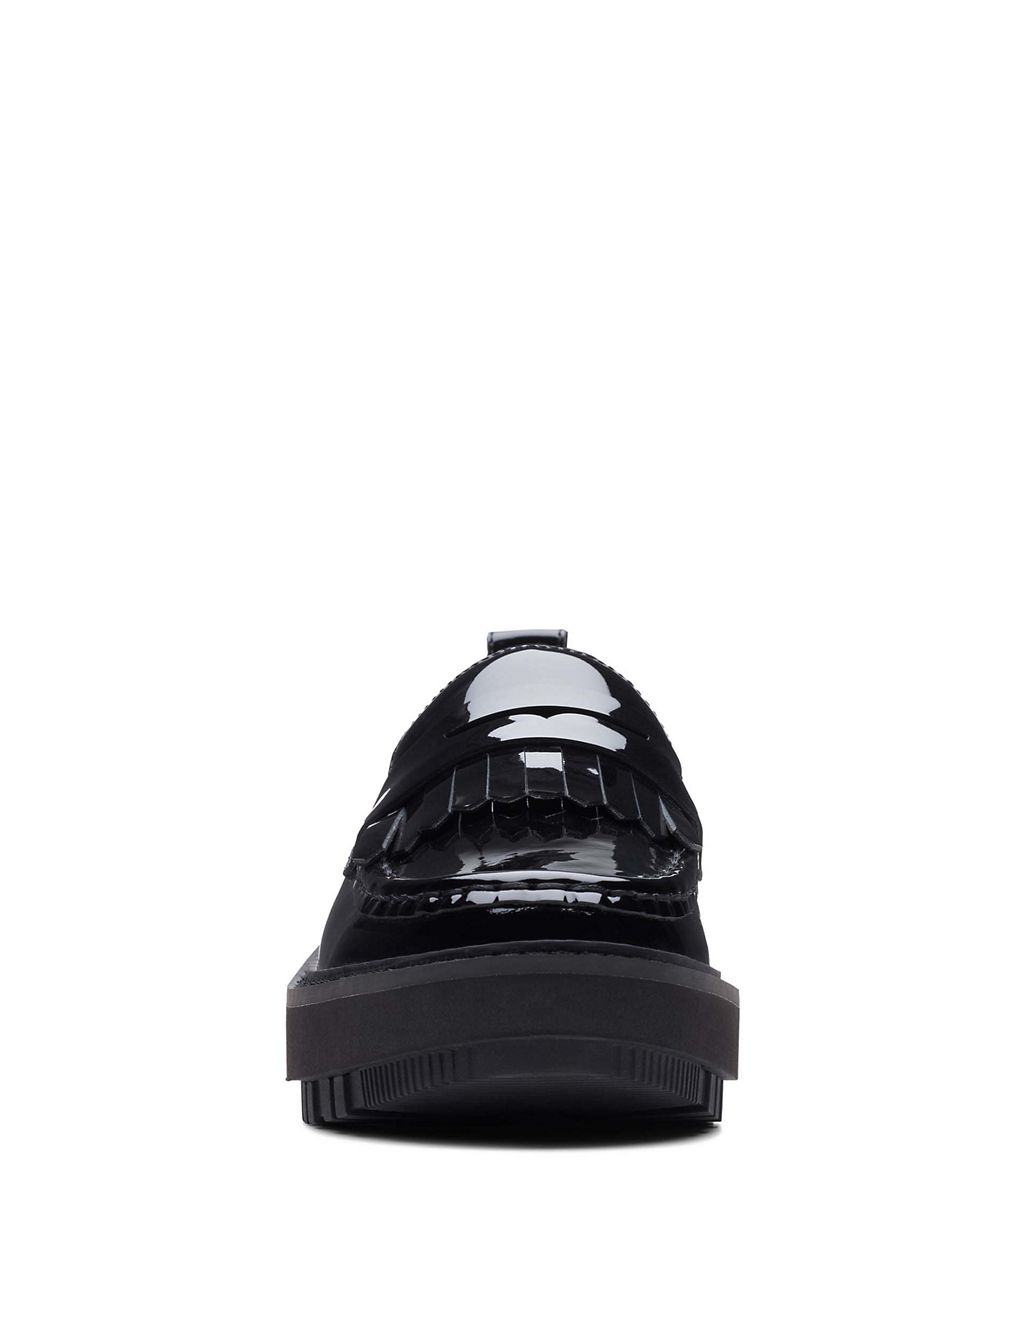 Leather Patent Flatform Loafers 2 of 7